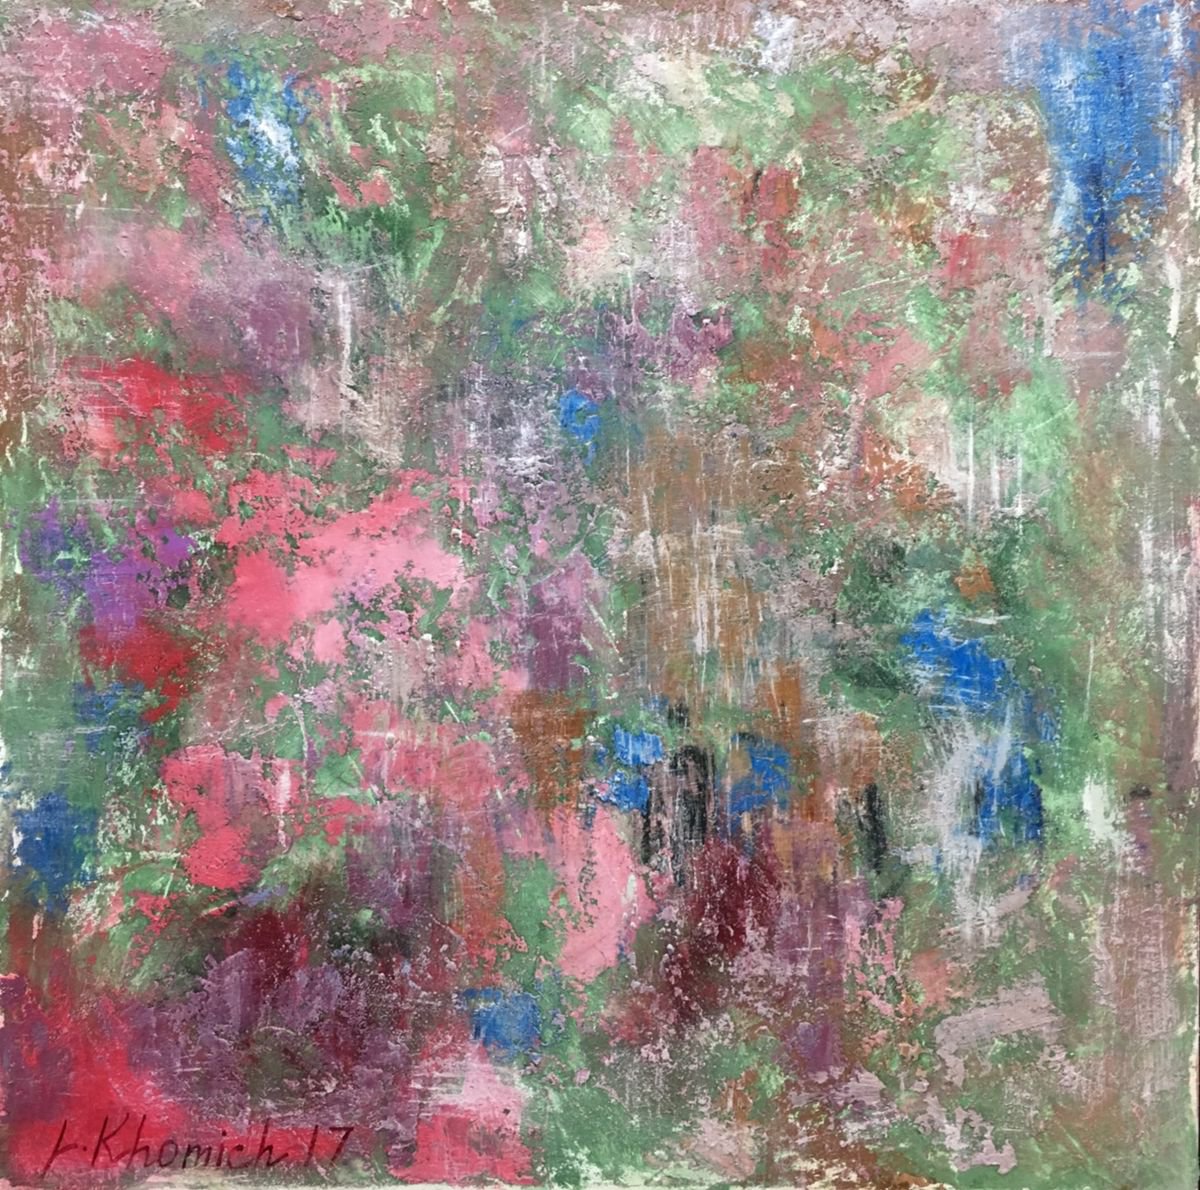 Abstract painting Spring colors 70x70cm Modern Art by Leo Khomich